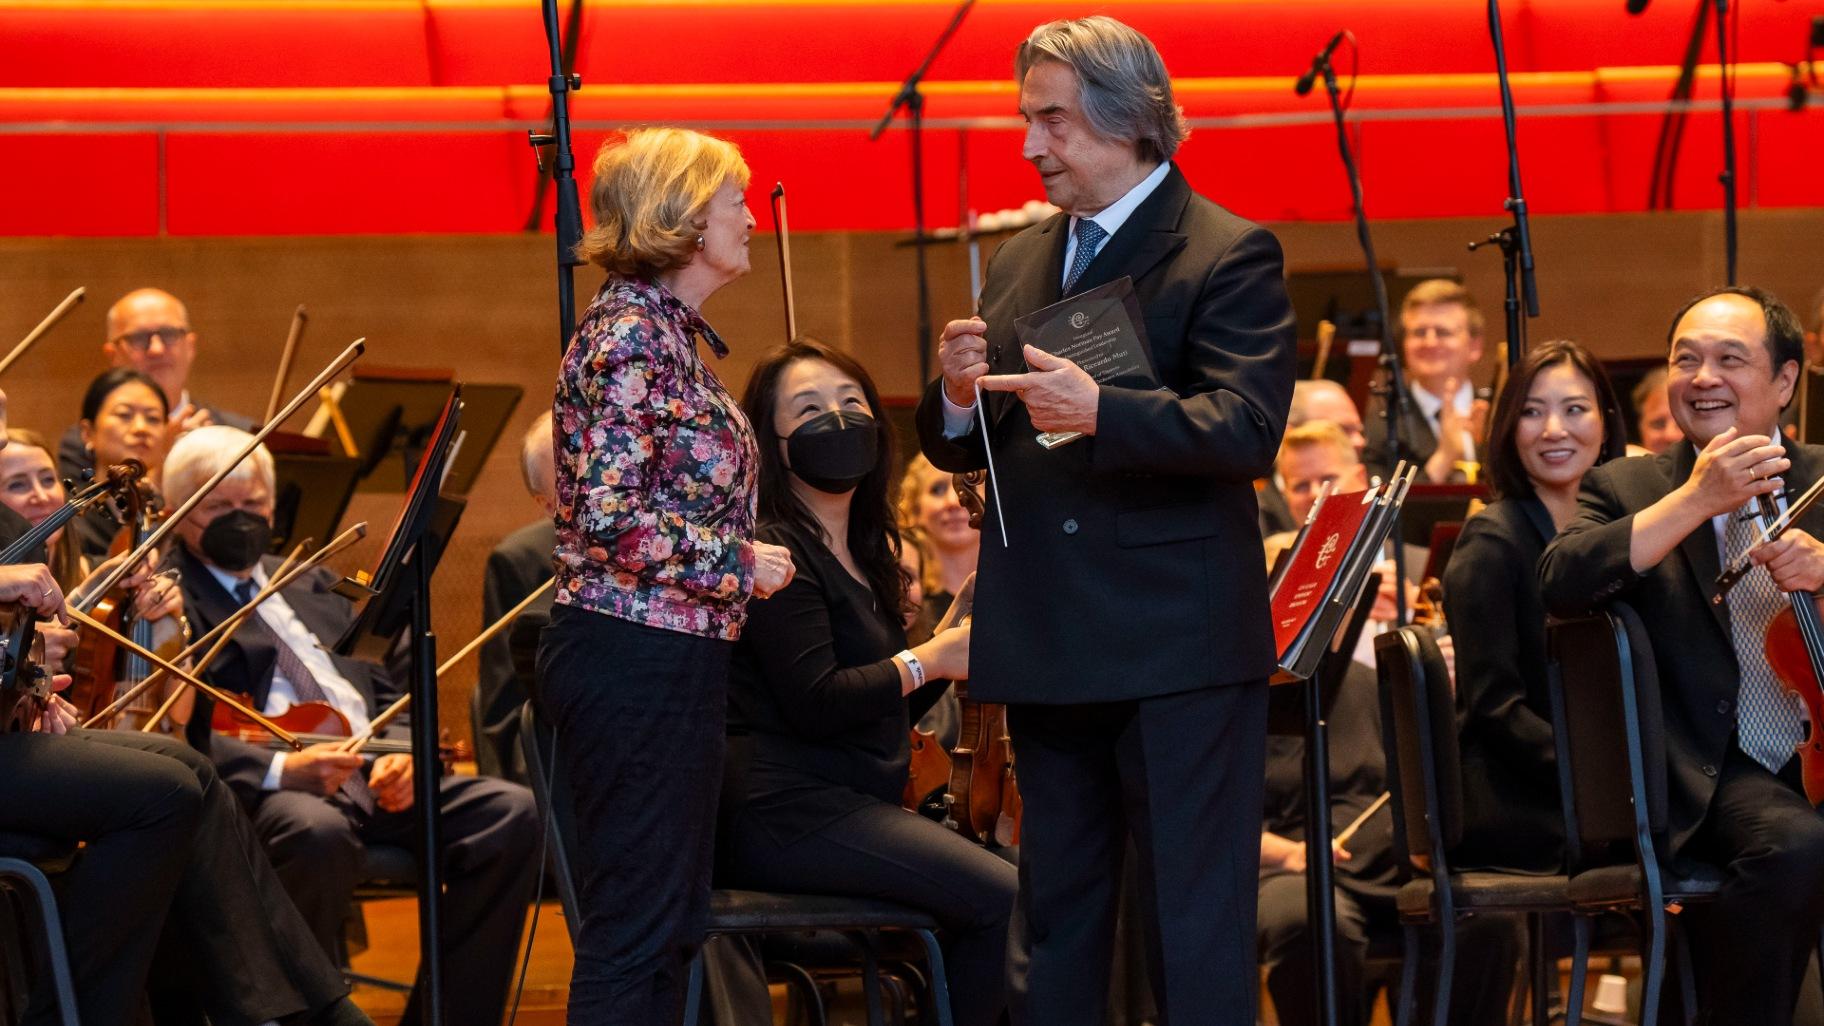 Music director Riccardo Muti accepts the inaugural Charles Norman Fay Award for Distinguished Leadership from Chicago Symphony Orchestra Association Board chair Mary Louise on stage following the Concert for Chicago in Millennium Park. (Todd Rosenberg)